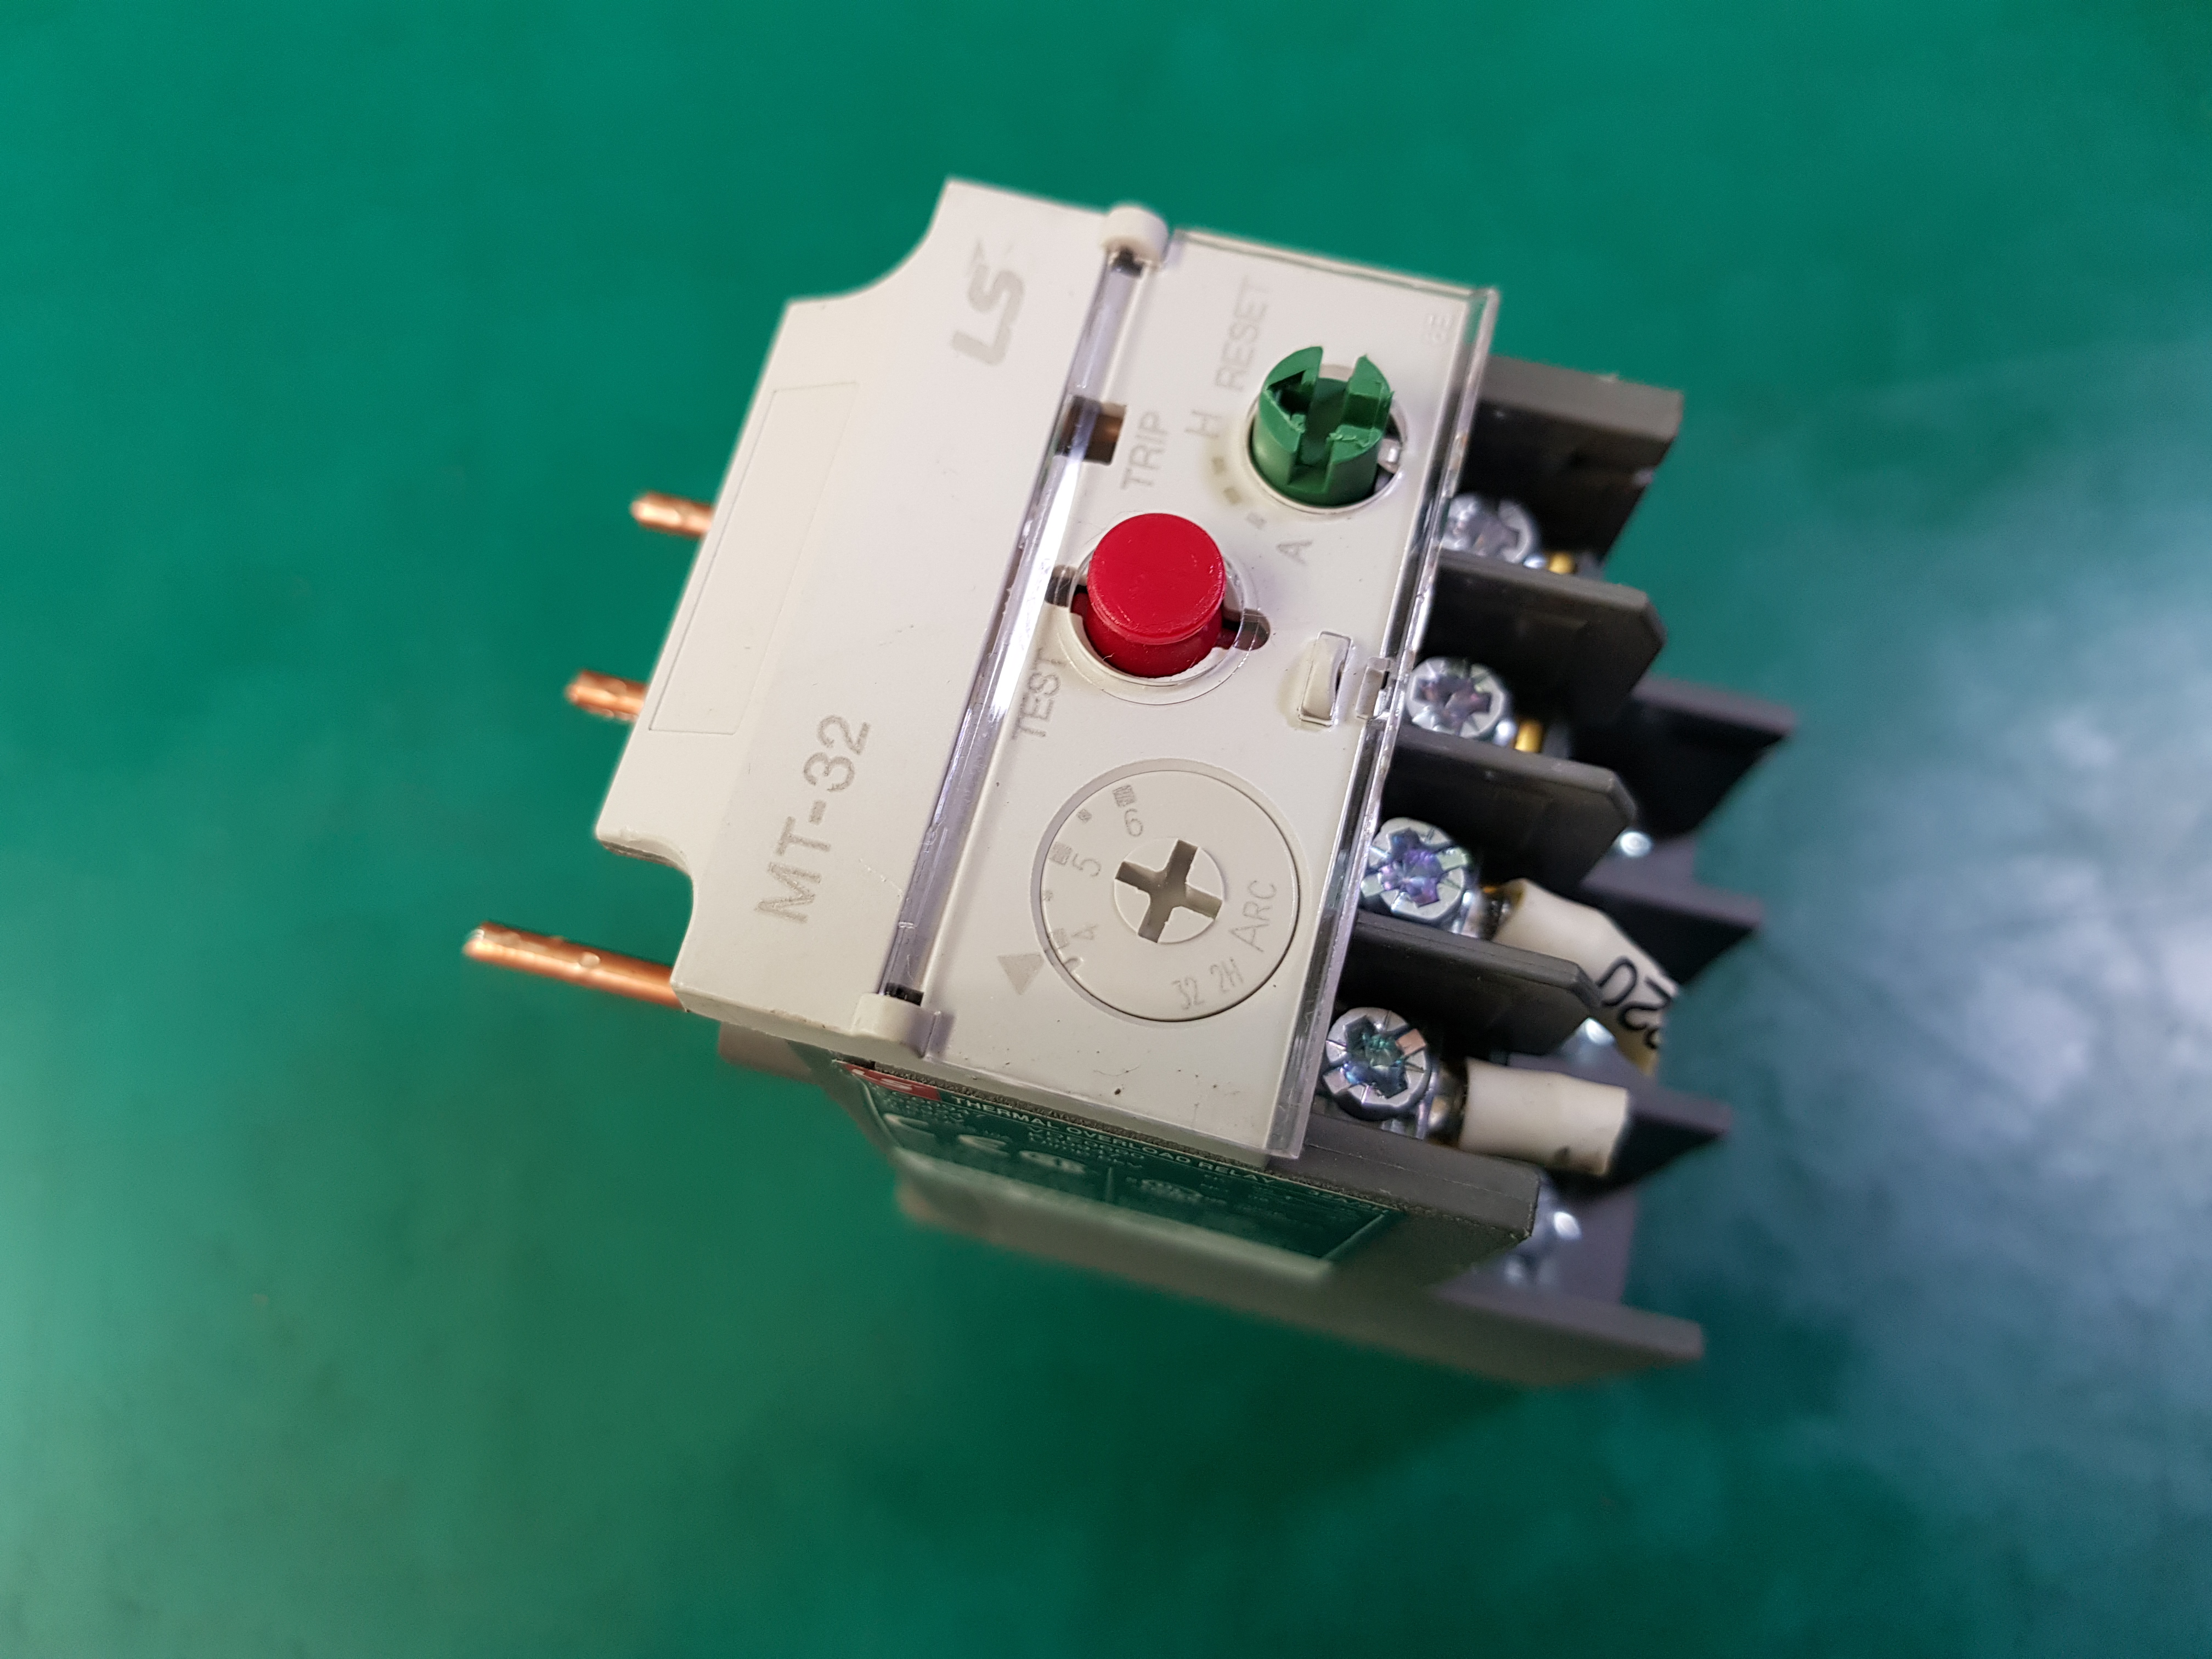 THERMAL OVERLOAD RELAY MT-32(중고)